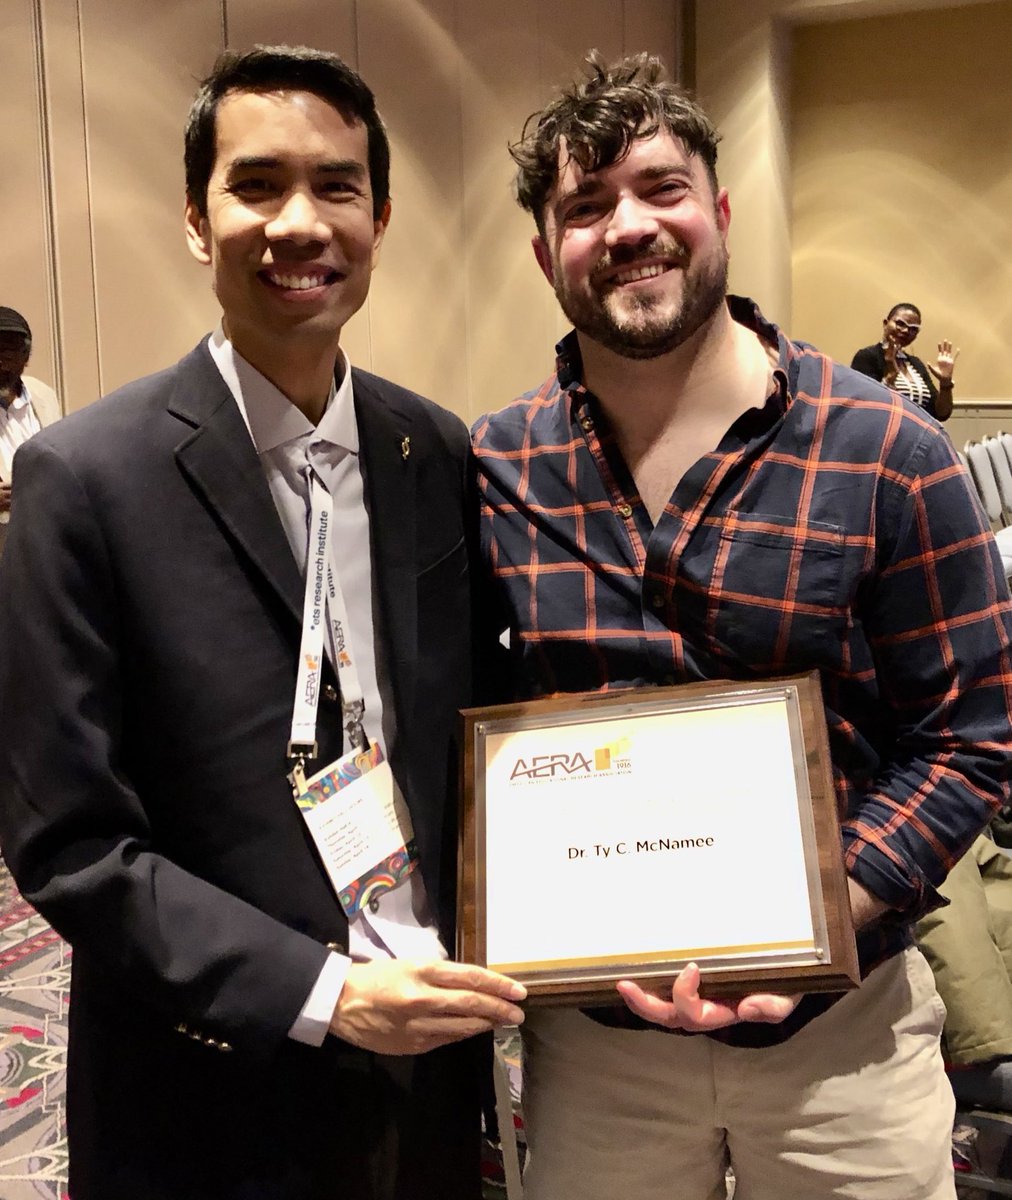 Thank you so much again to @AERADiv_J for the Dissertation of the Year Award! This was a labor of love, with many community members supporting and contributing — I so appreciate y’all! Shoutout to @DrRoyYChan for chairing the selection committee and all the committee members!